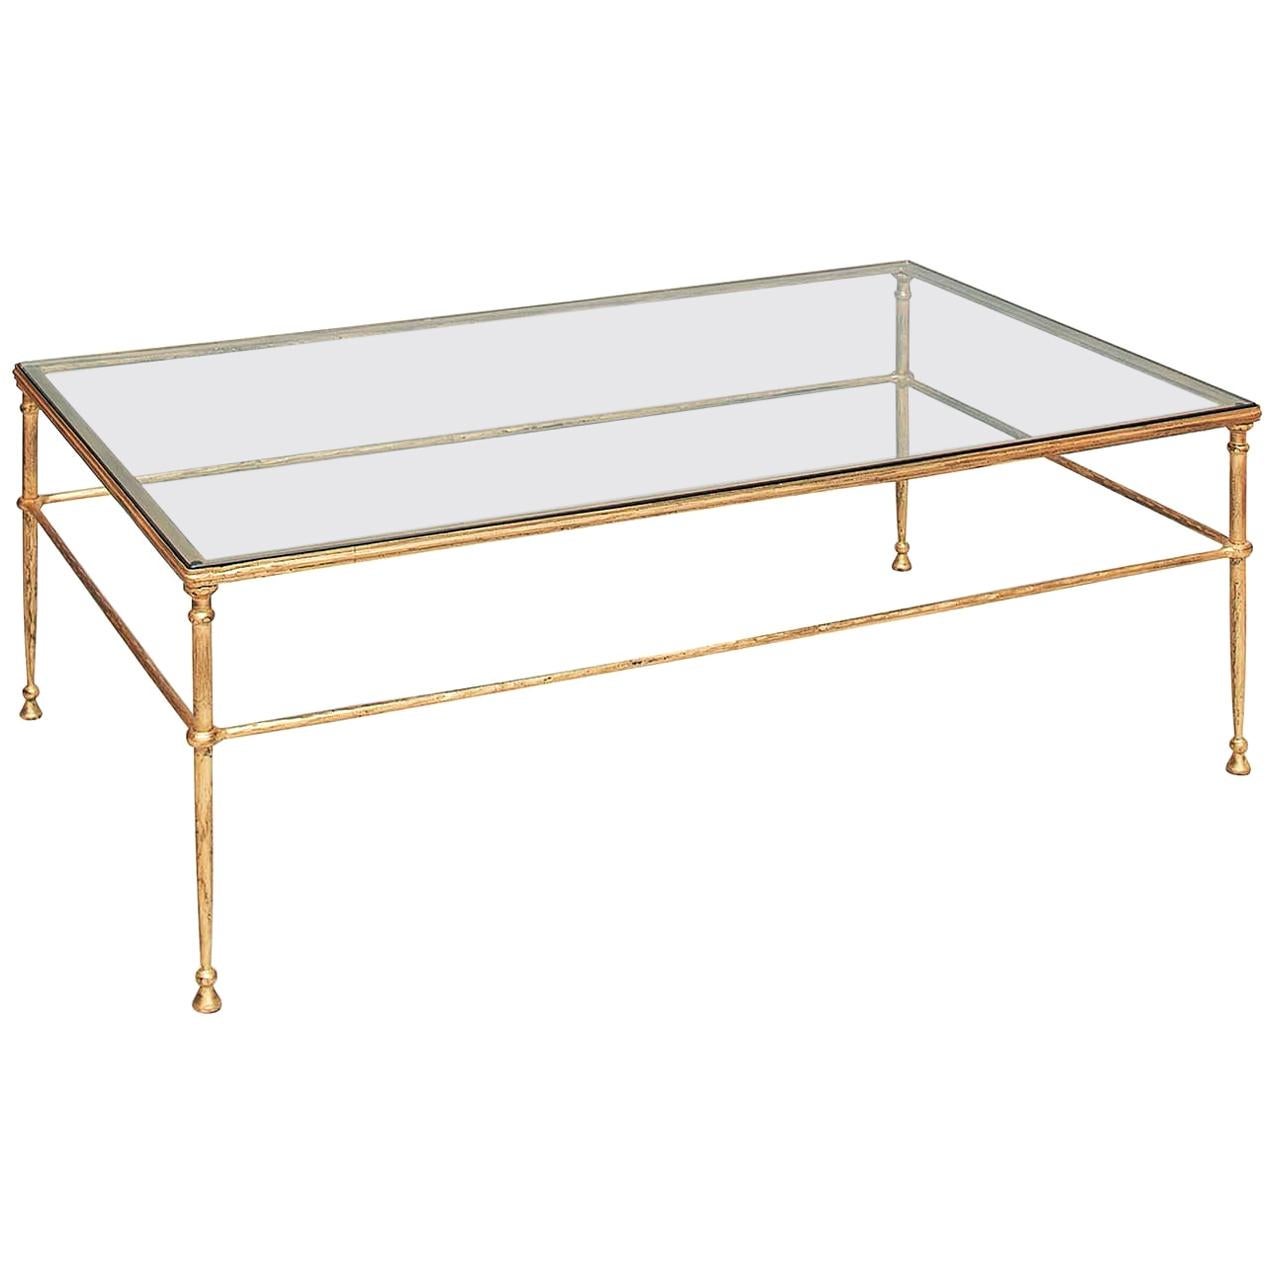 Class Rectangular Coffee Table For Sale